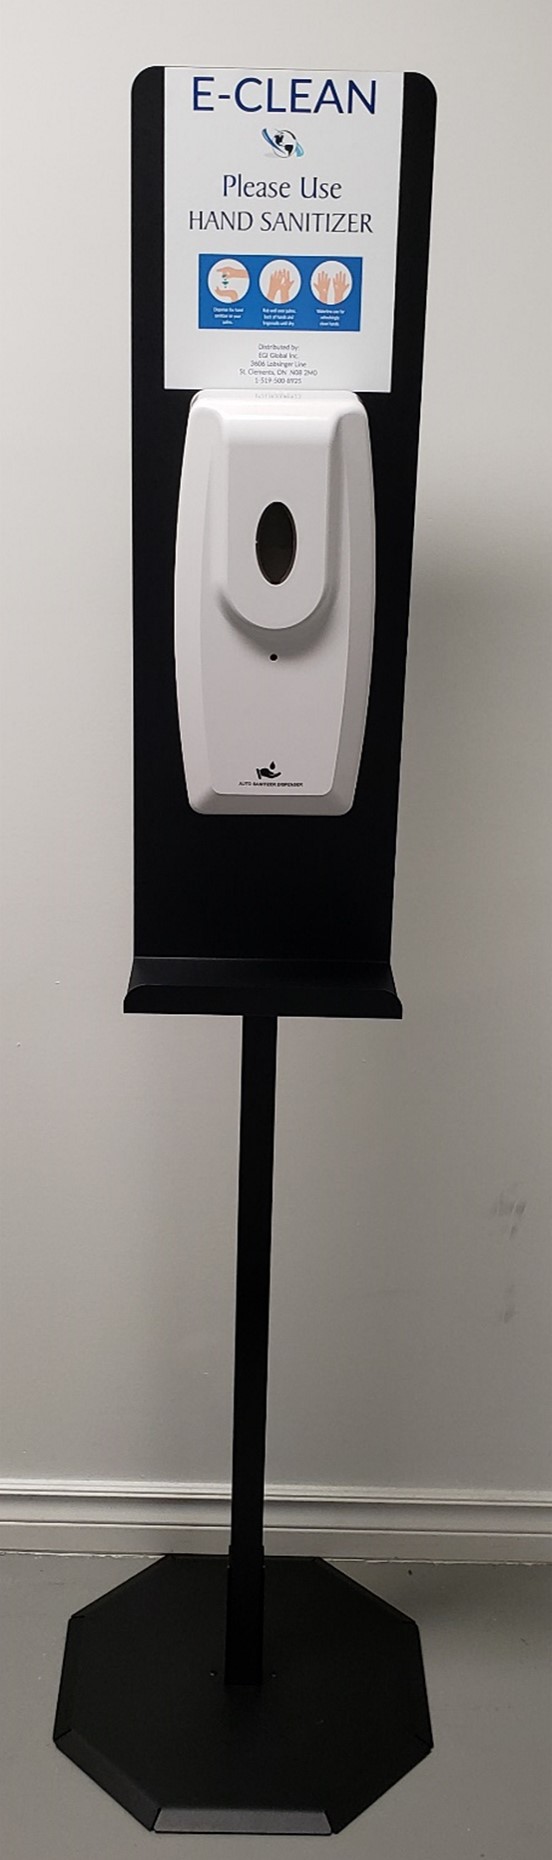 Hand Sanitizer Stand and Dispenser